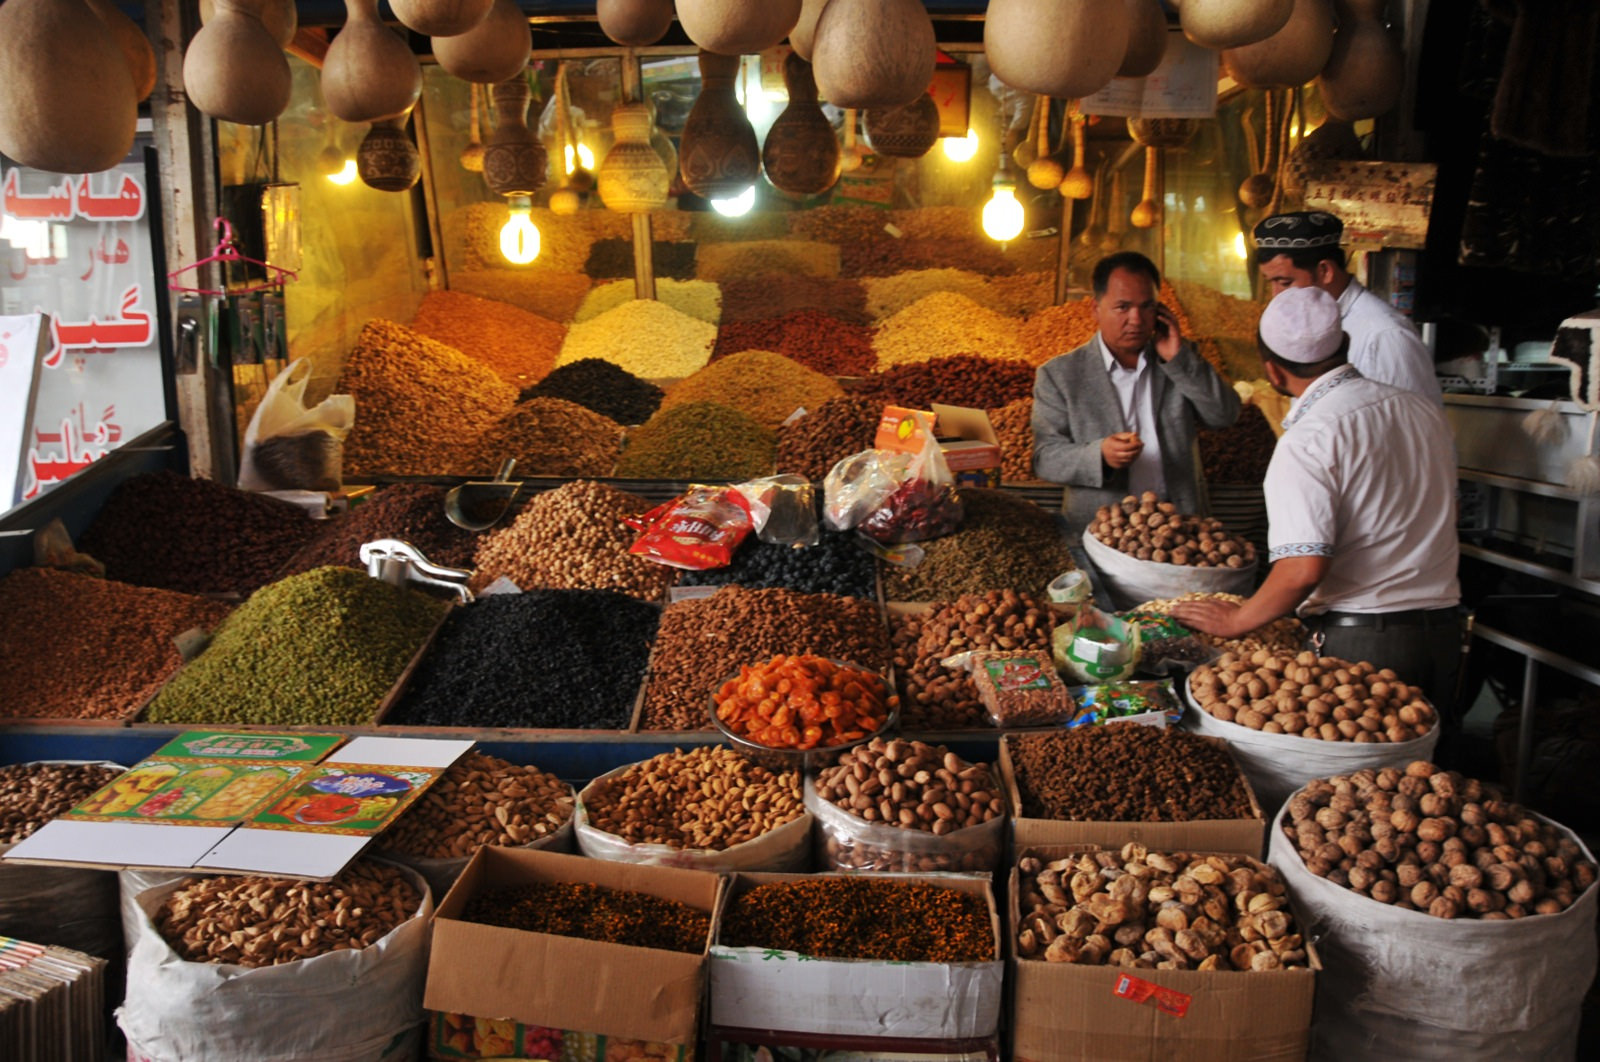 A stall selling dried foods at the markets. Pic: miyake juin/flickr